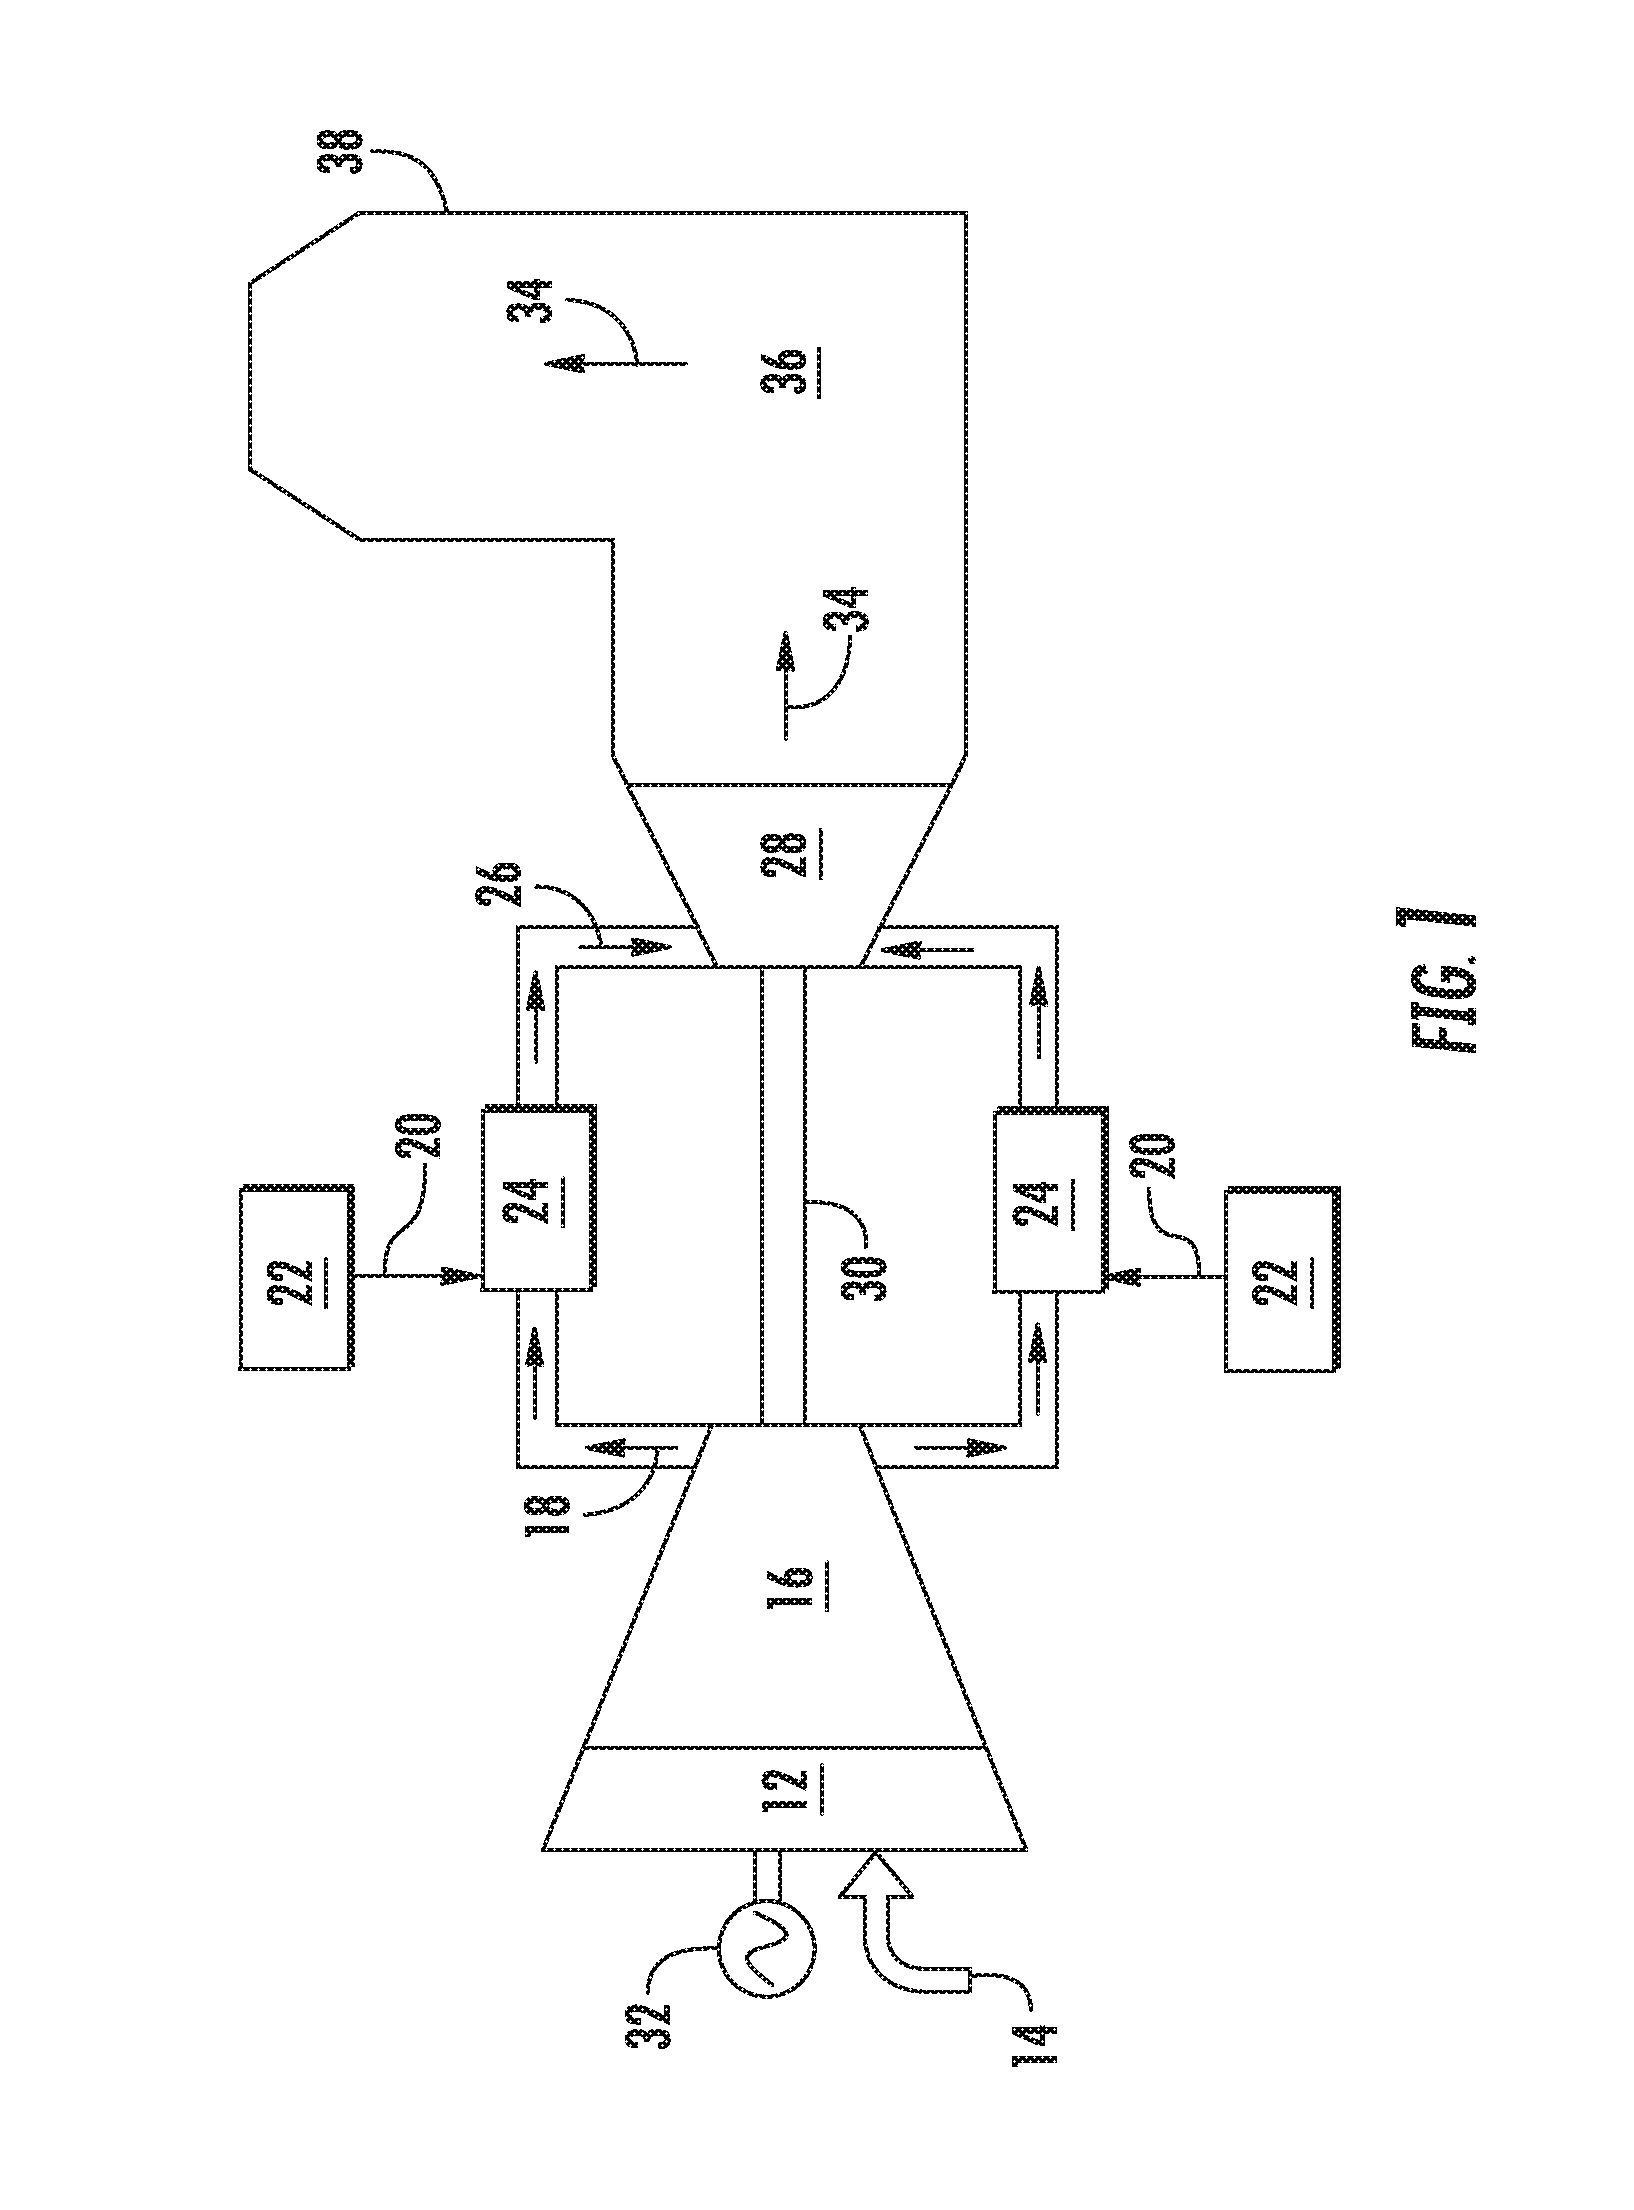 Method for Detecting Leaks In A Fuel Circuit of a Gas Turbine Fuel Supply System